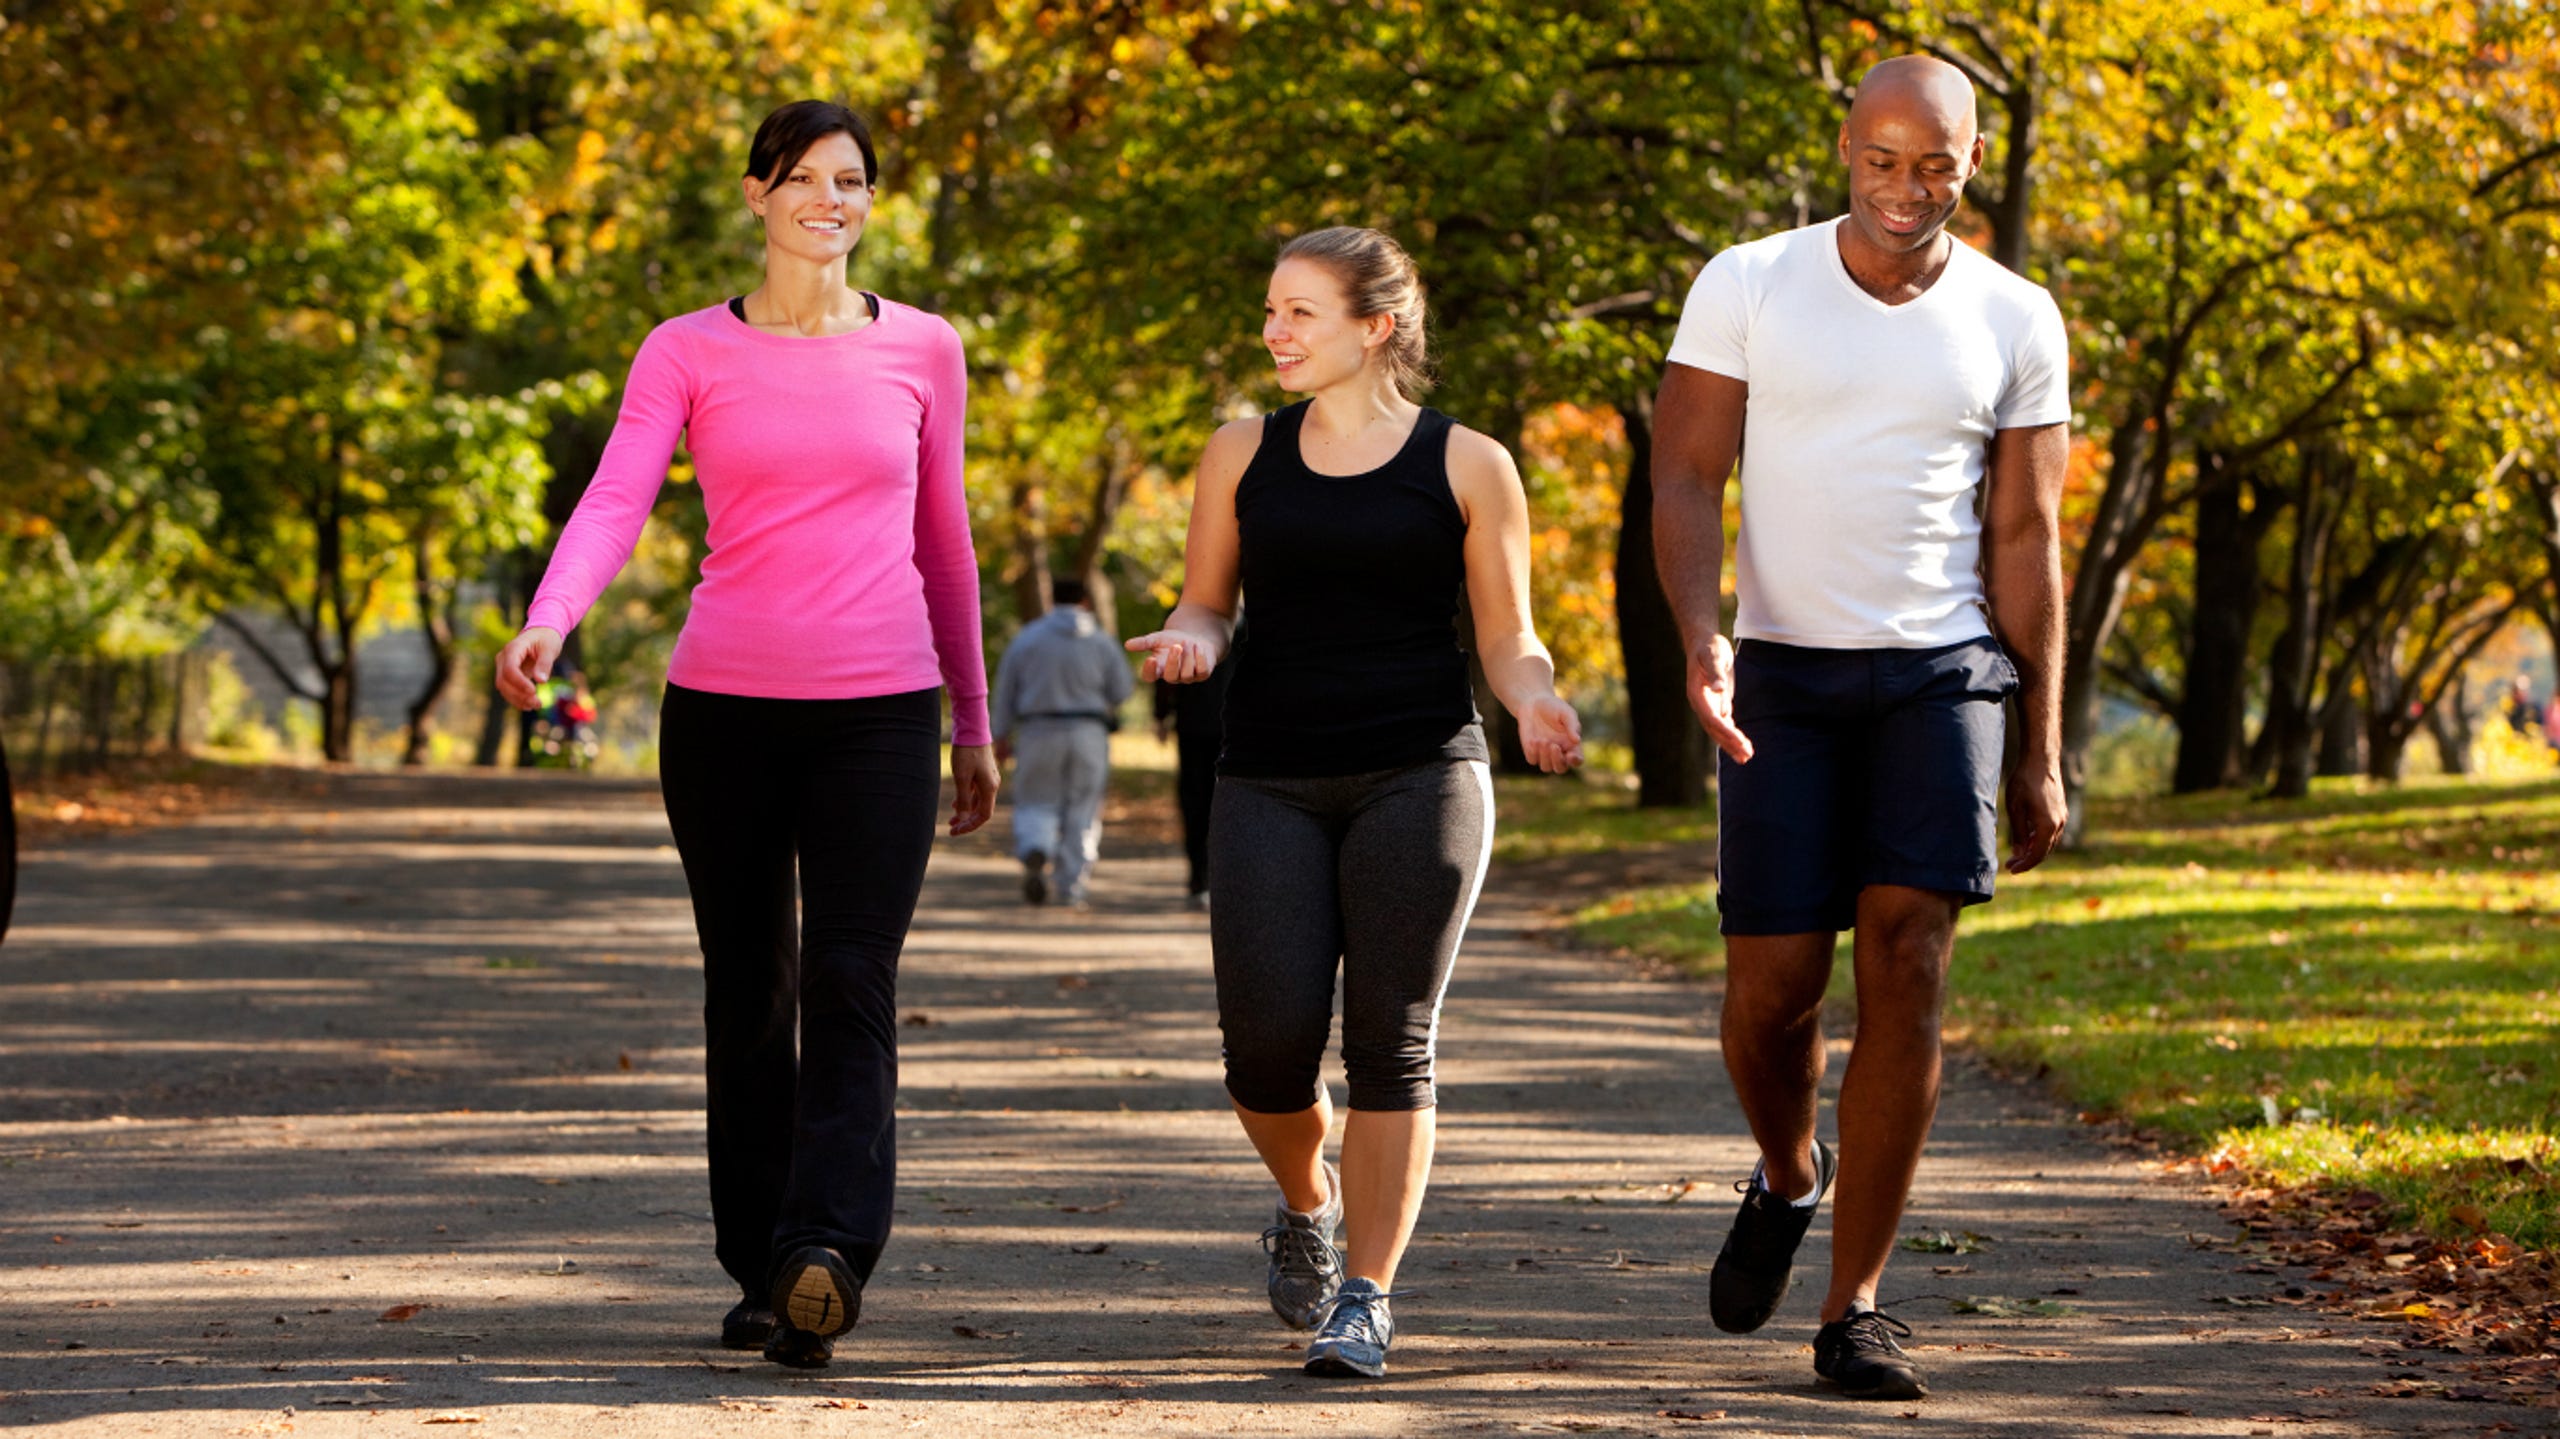 How much time walking helps Weight Loss: 